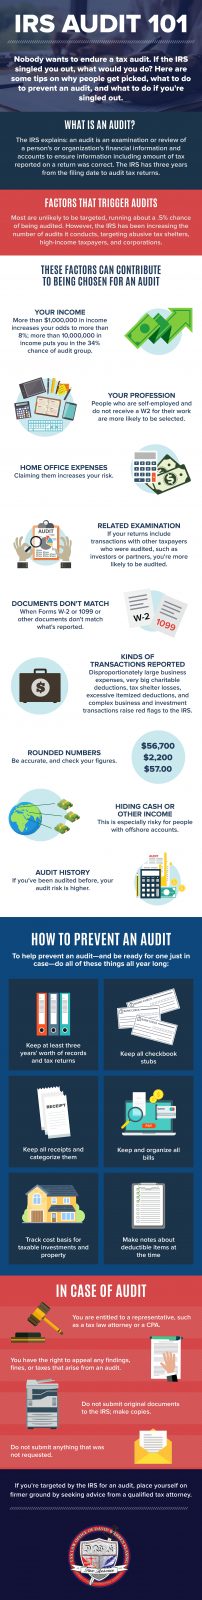 IRS Audit 101 (Infographic)